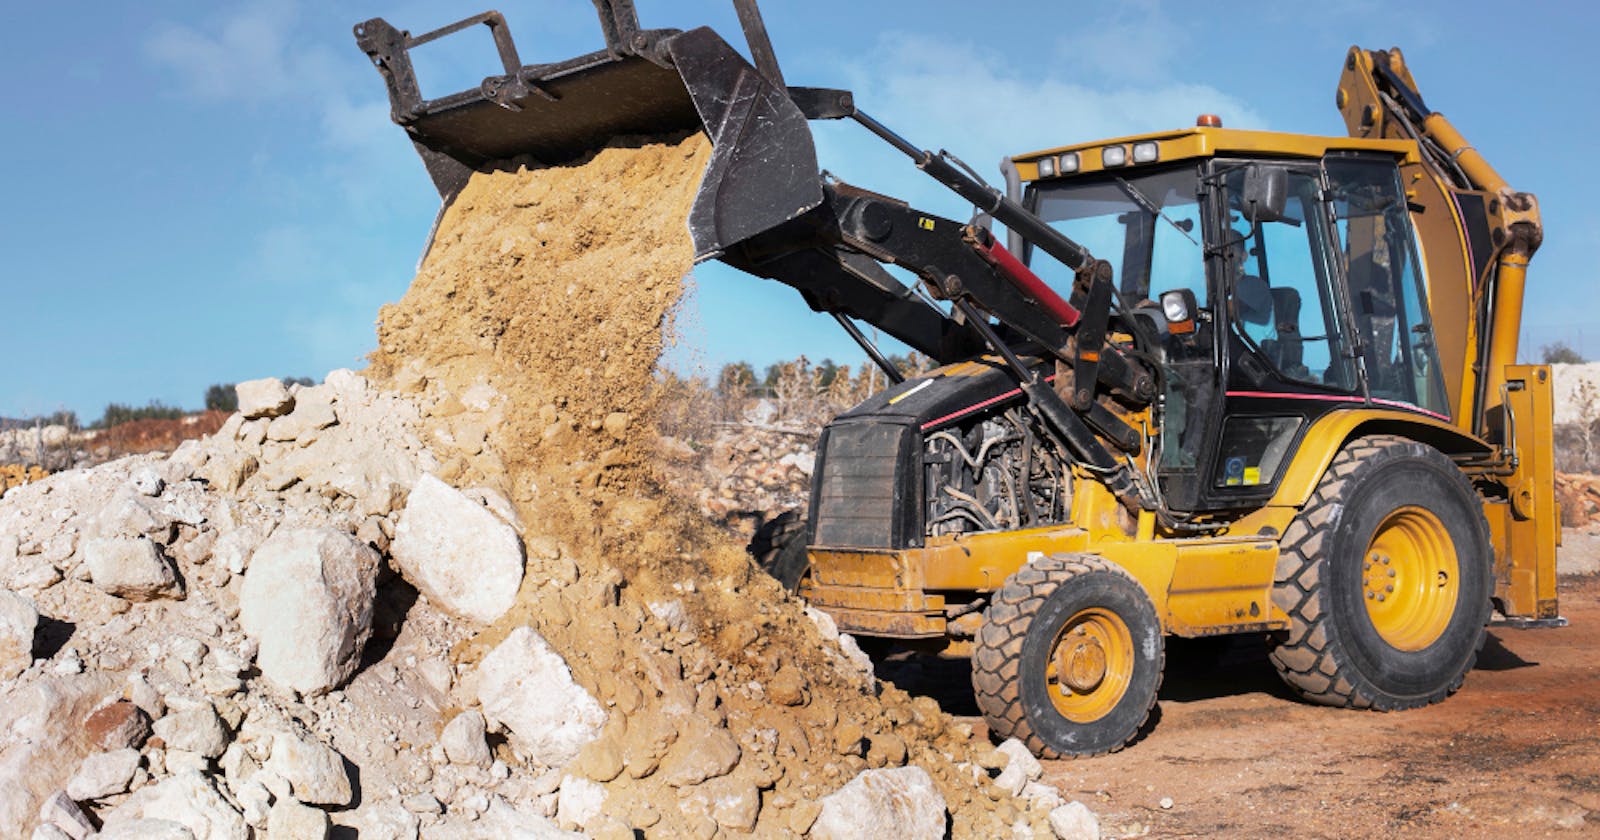 The Global Construction Equipment Rental Market research aims to quantify data and generalize results from a larger population. It involves structured